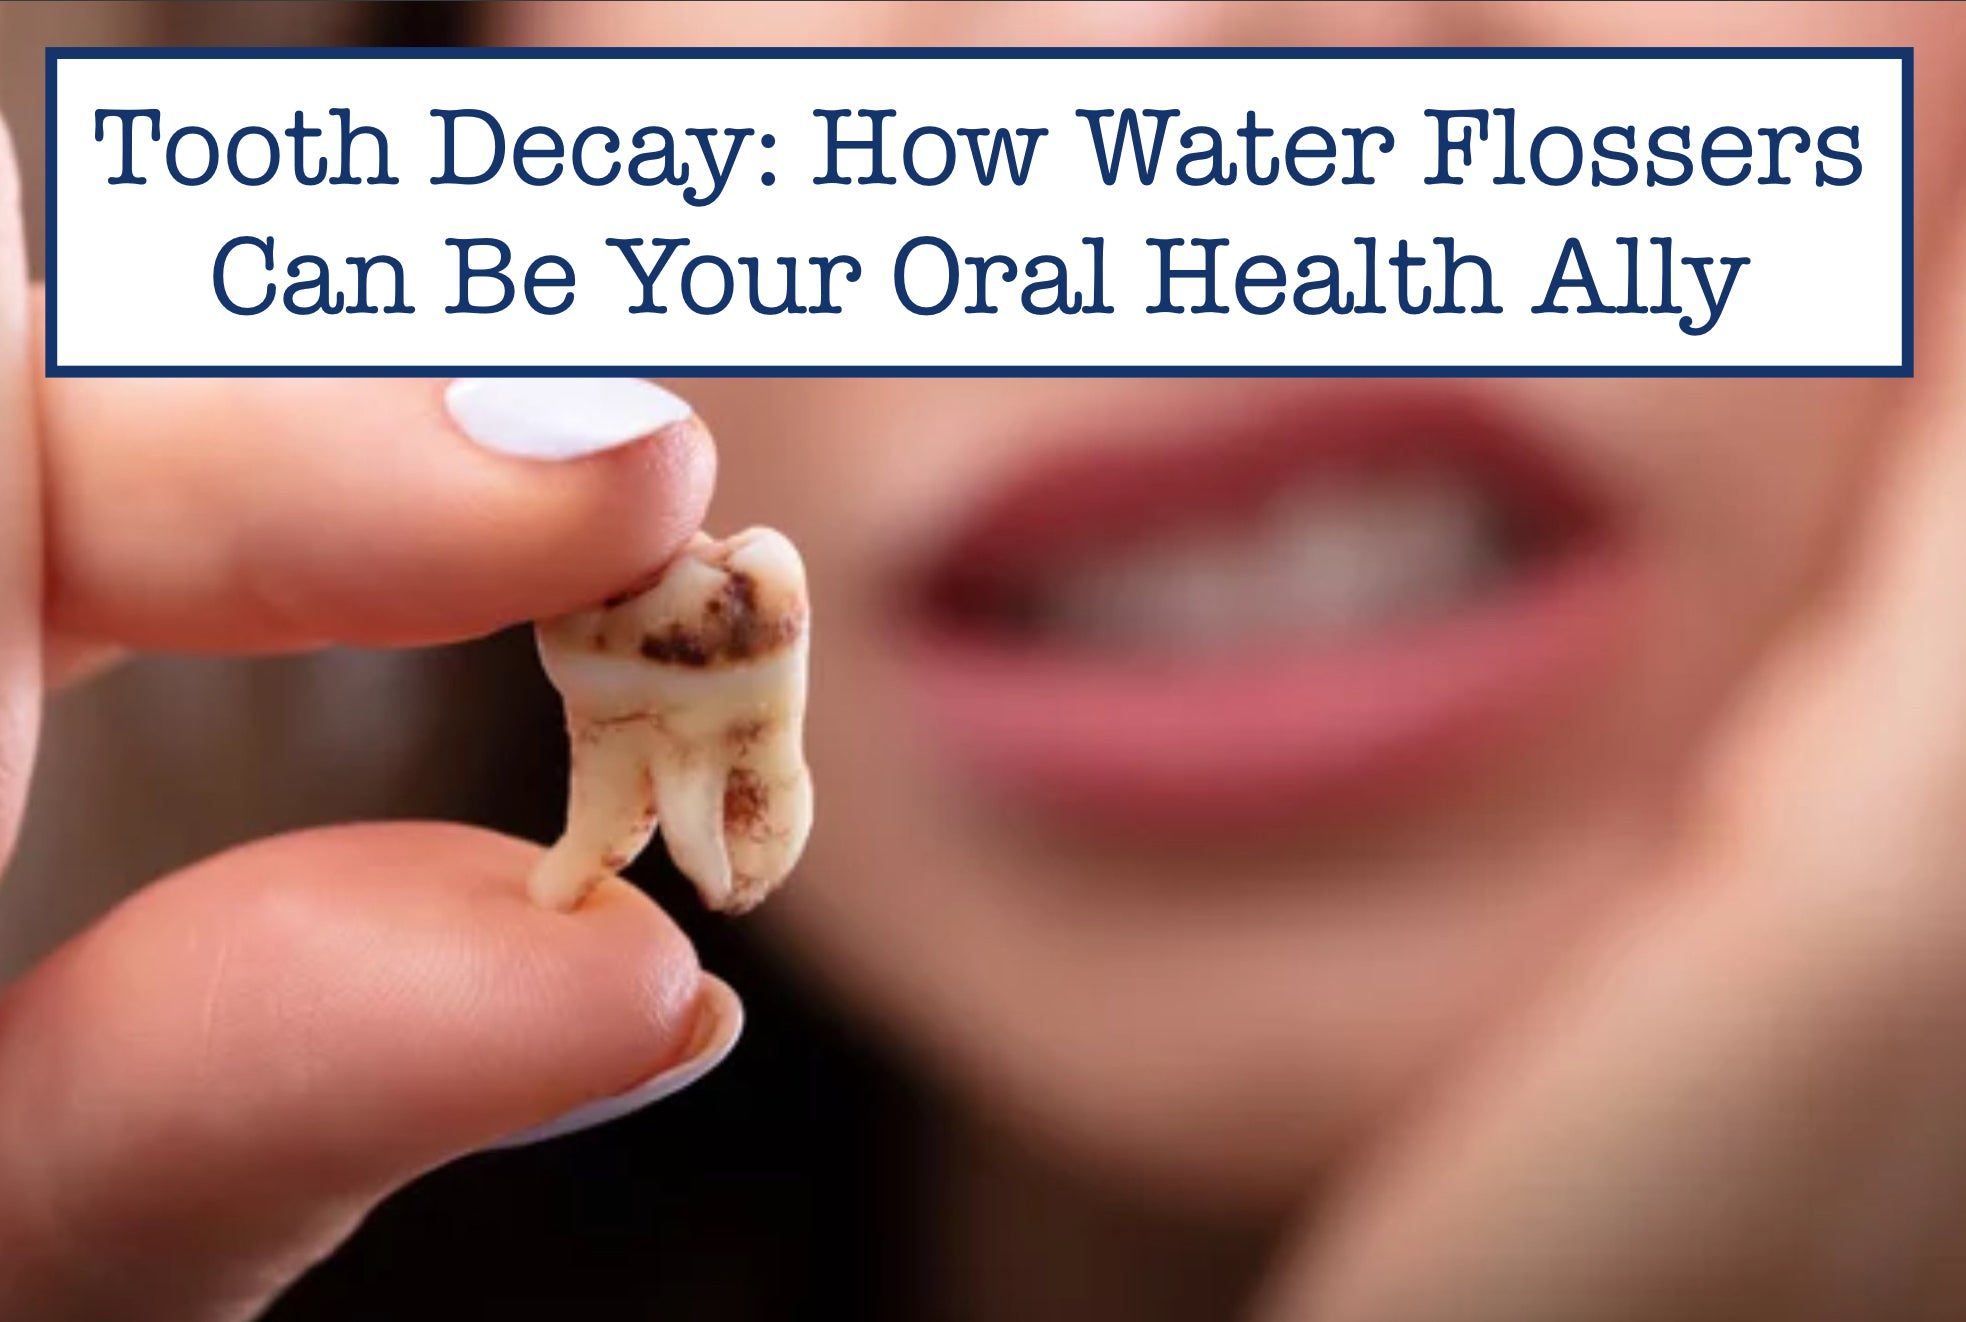 Tooth Decay: How Water Flossers Can Be Your Oral Health Ally